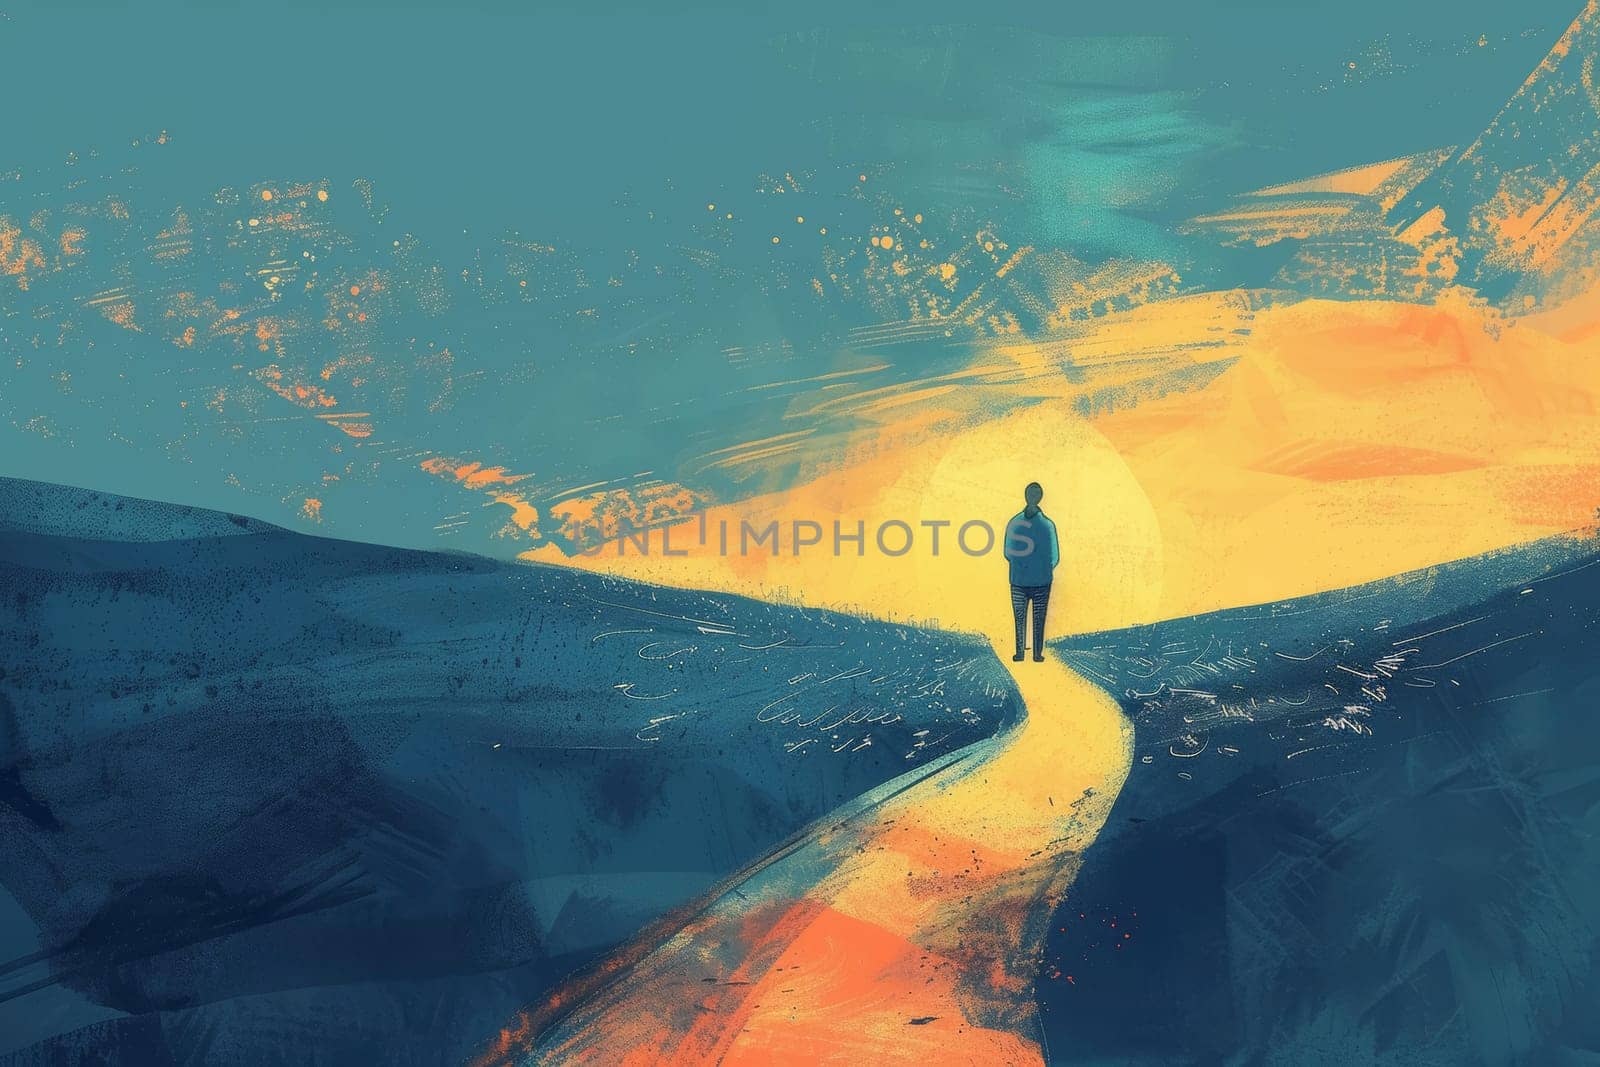 An evocative illustration depicts a person on a solitary path toward a bright horizon, signifying hope and progress